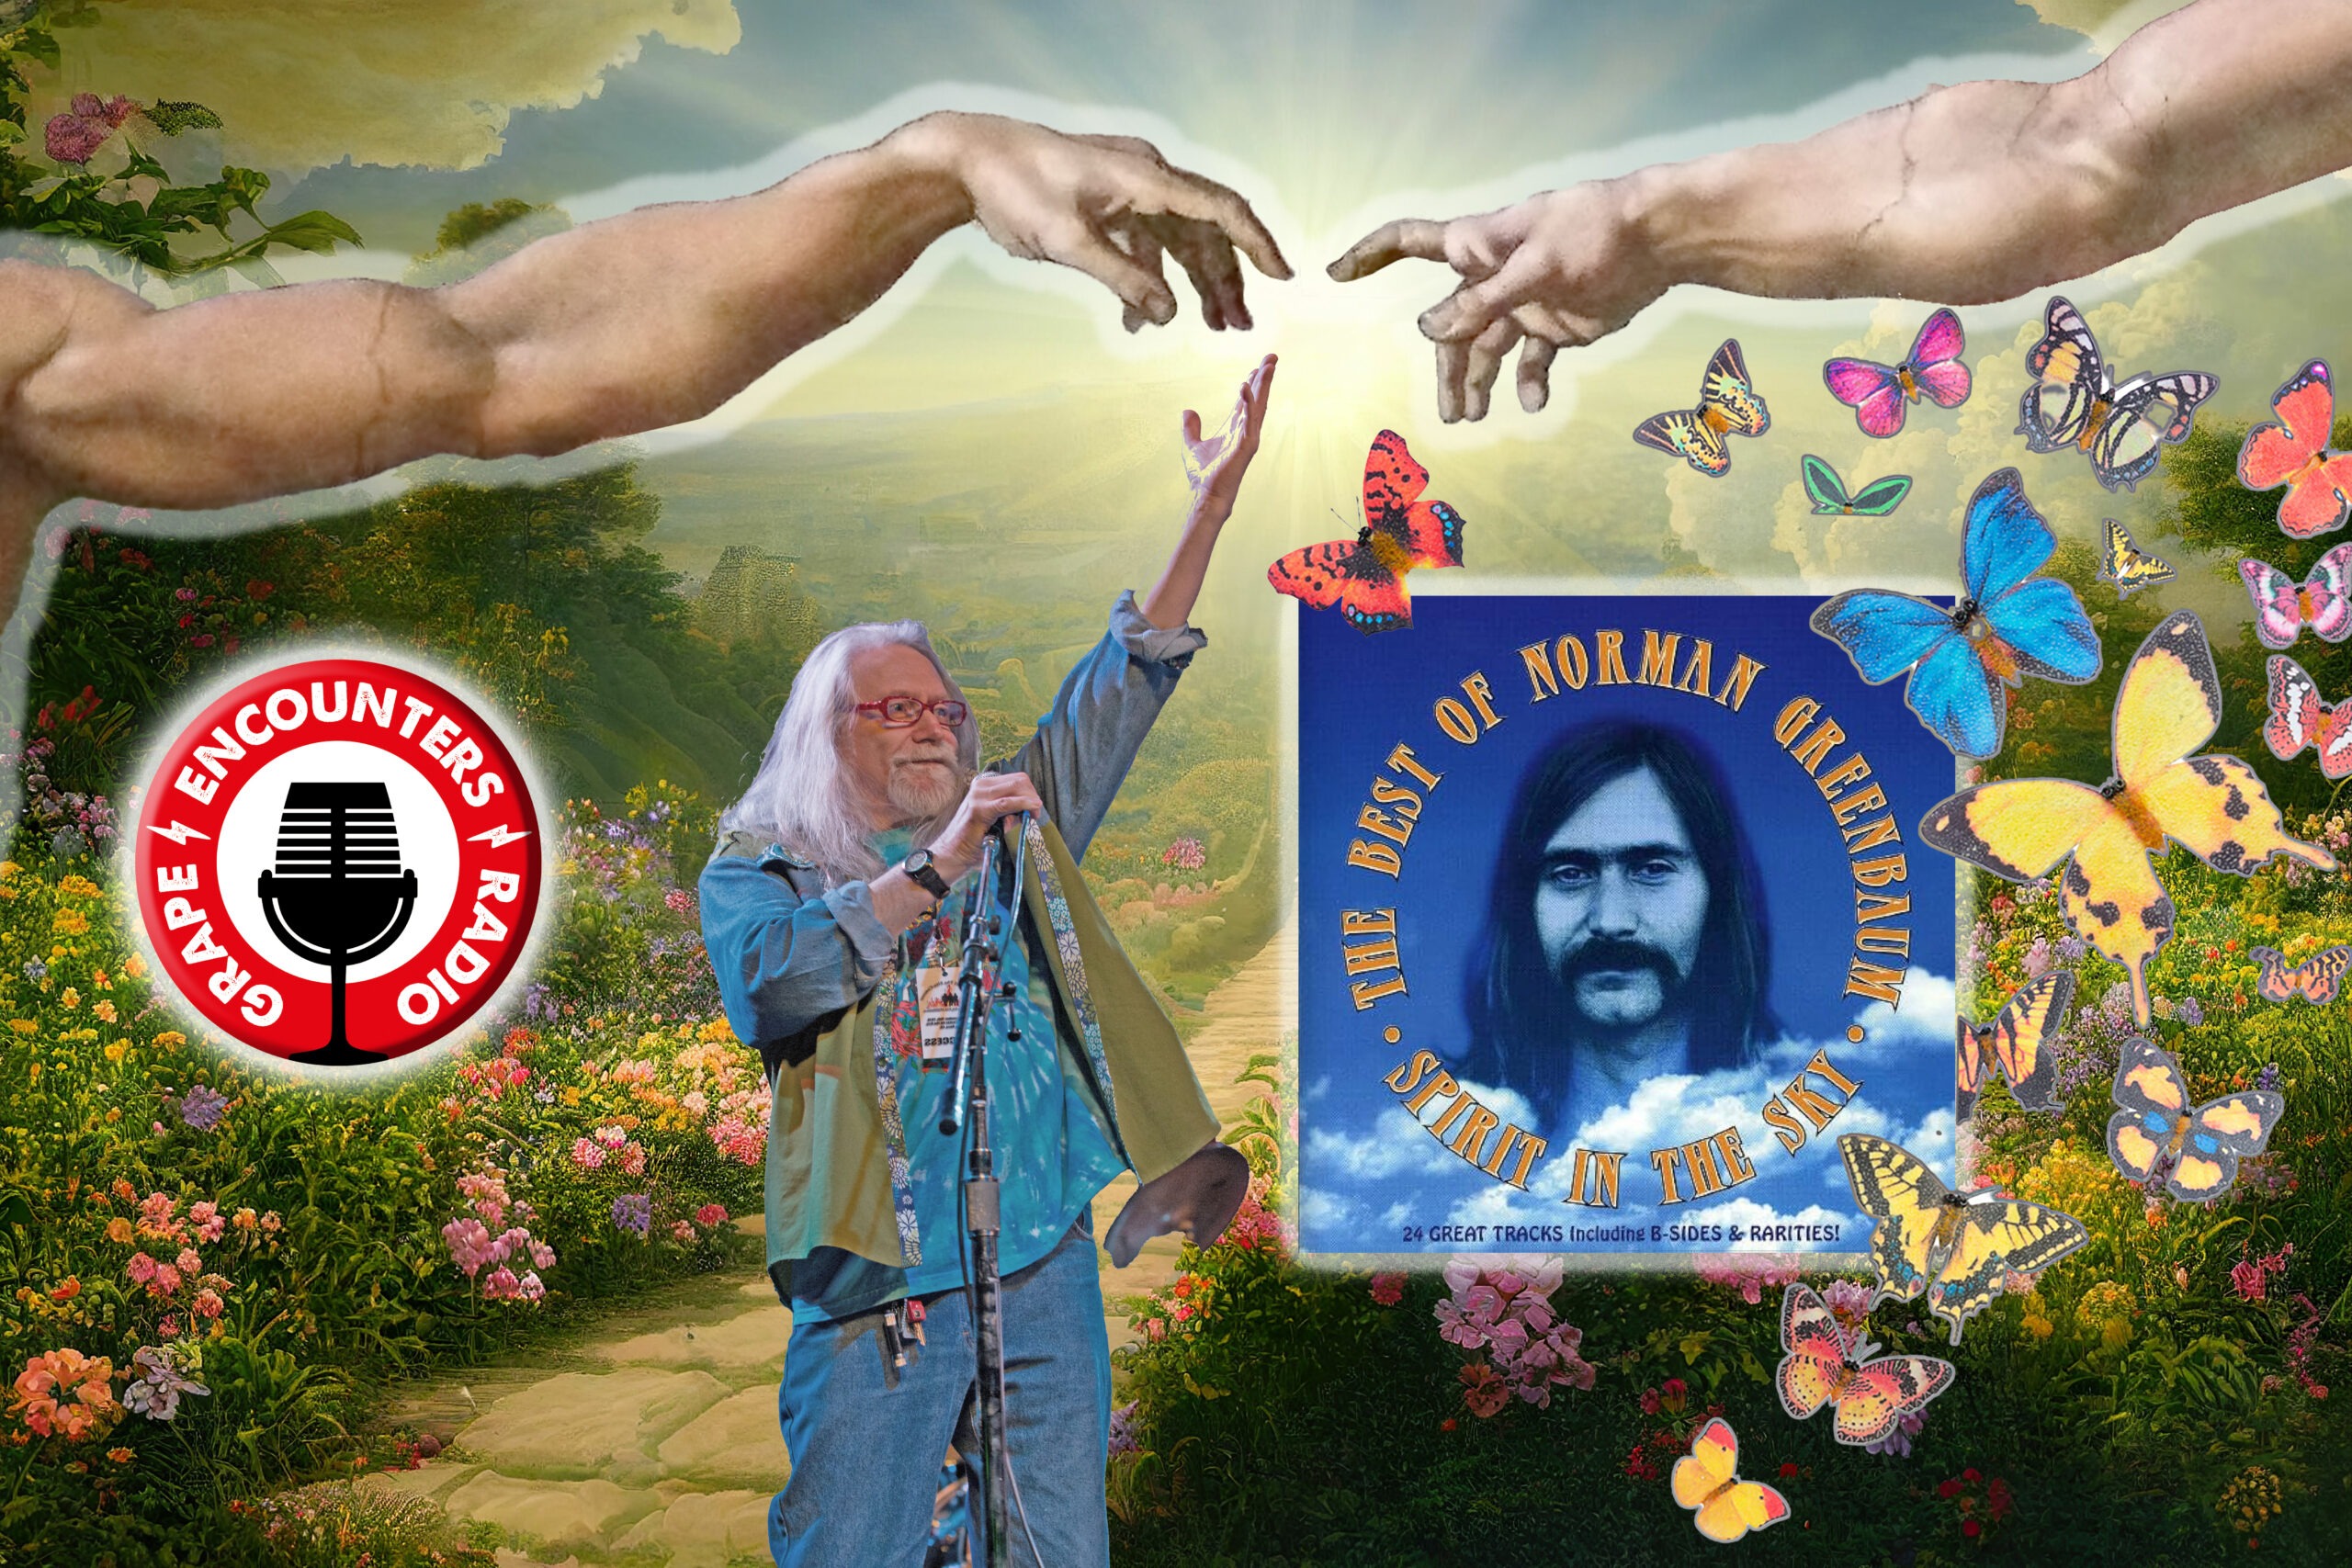 Episode #781 – Norman Greenbaum’s Legendary Spirit in the Sky’s Deep Wine Country Roots, Life-Changing for Millions of Fans